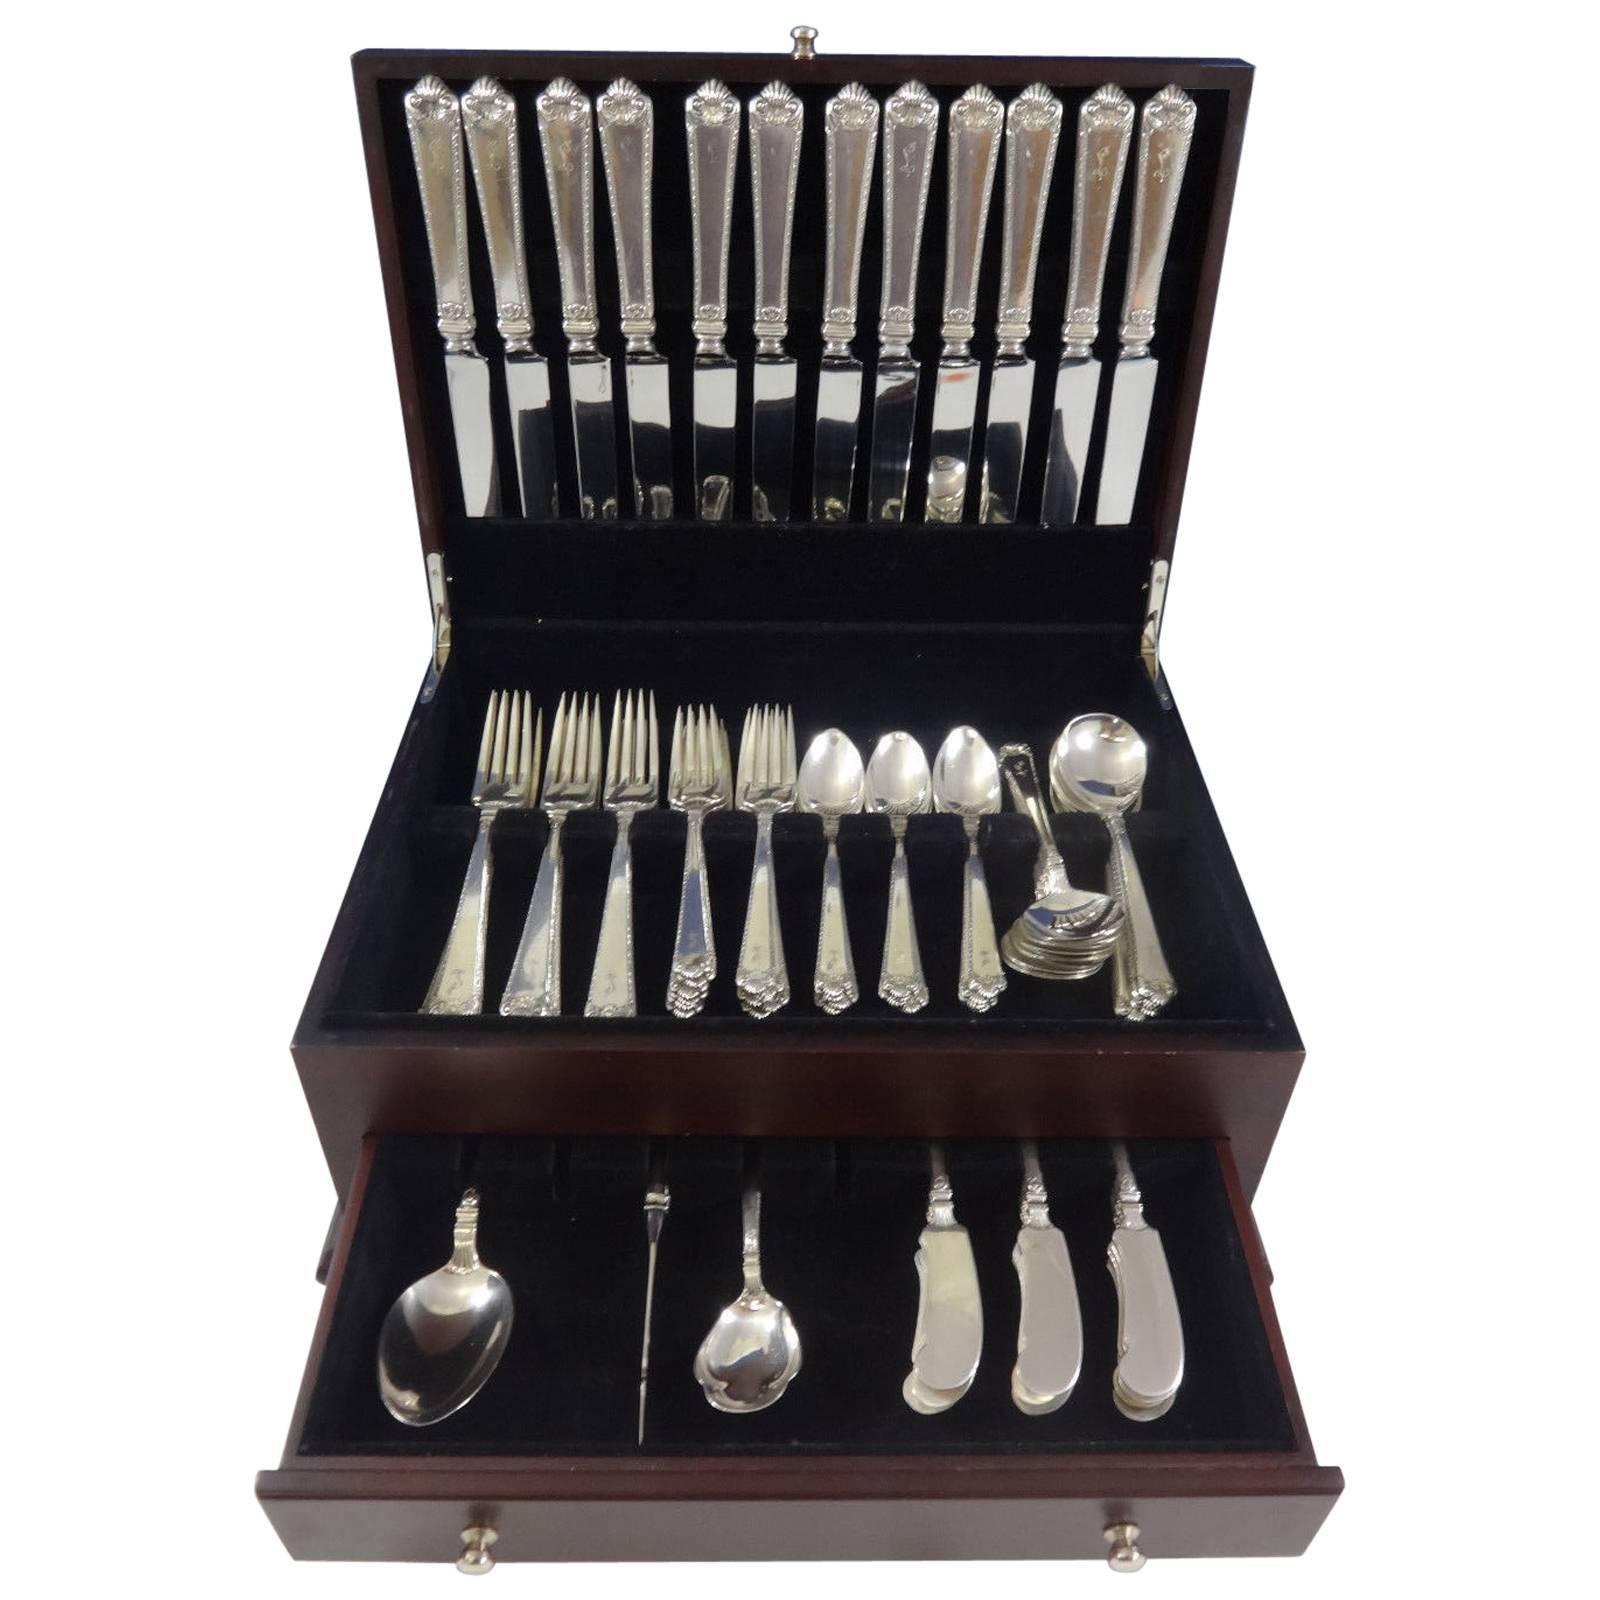 Fabulous George II rex hand chased by Watson sterling silver dinner size flatware service, 75 pieces. This pattern is wonderfully heavy. This set includes: 

12 dinner size knives, 10 1/8